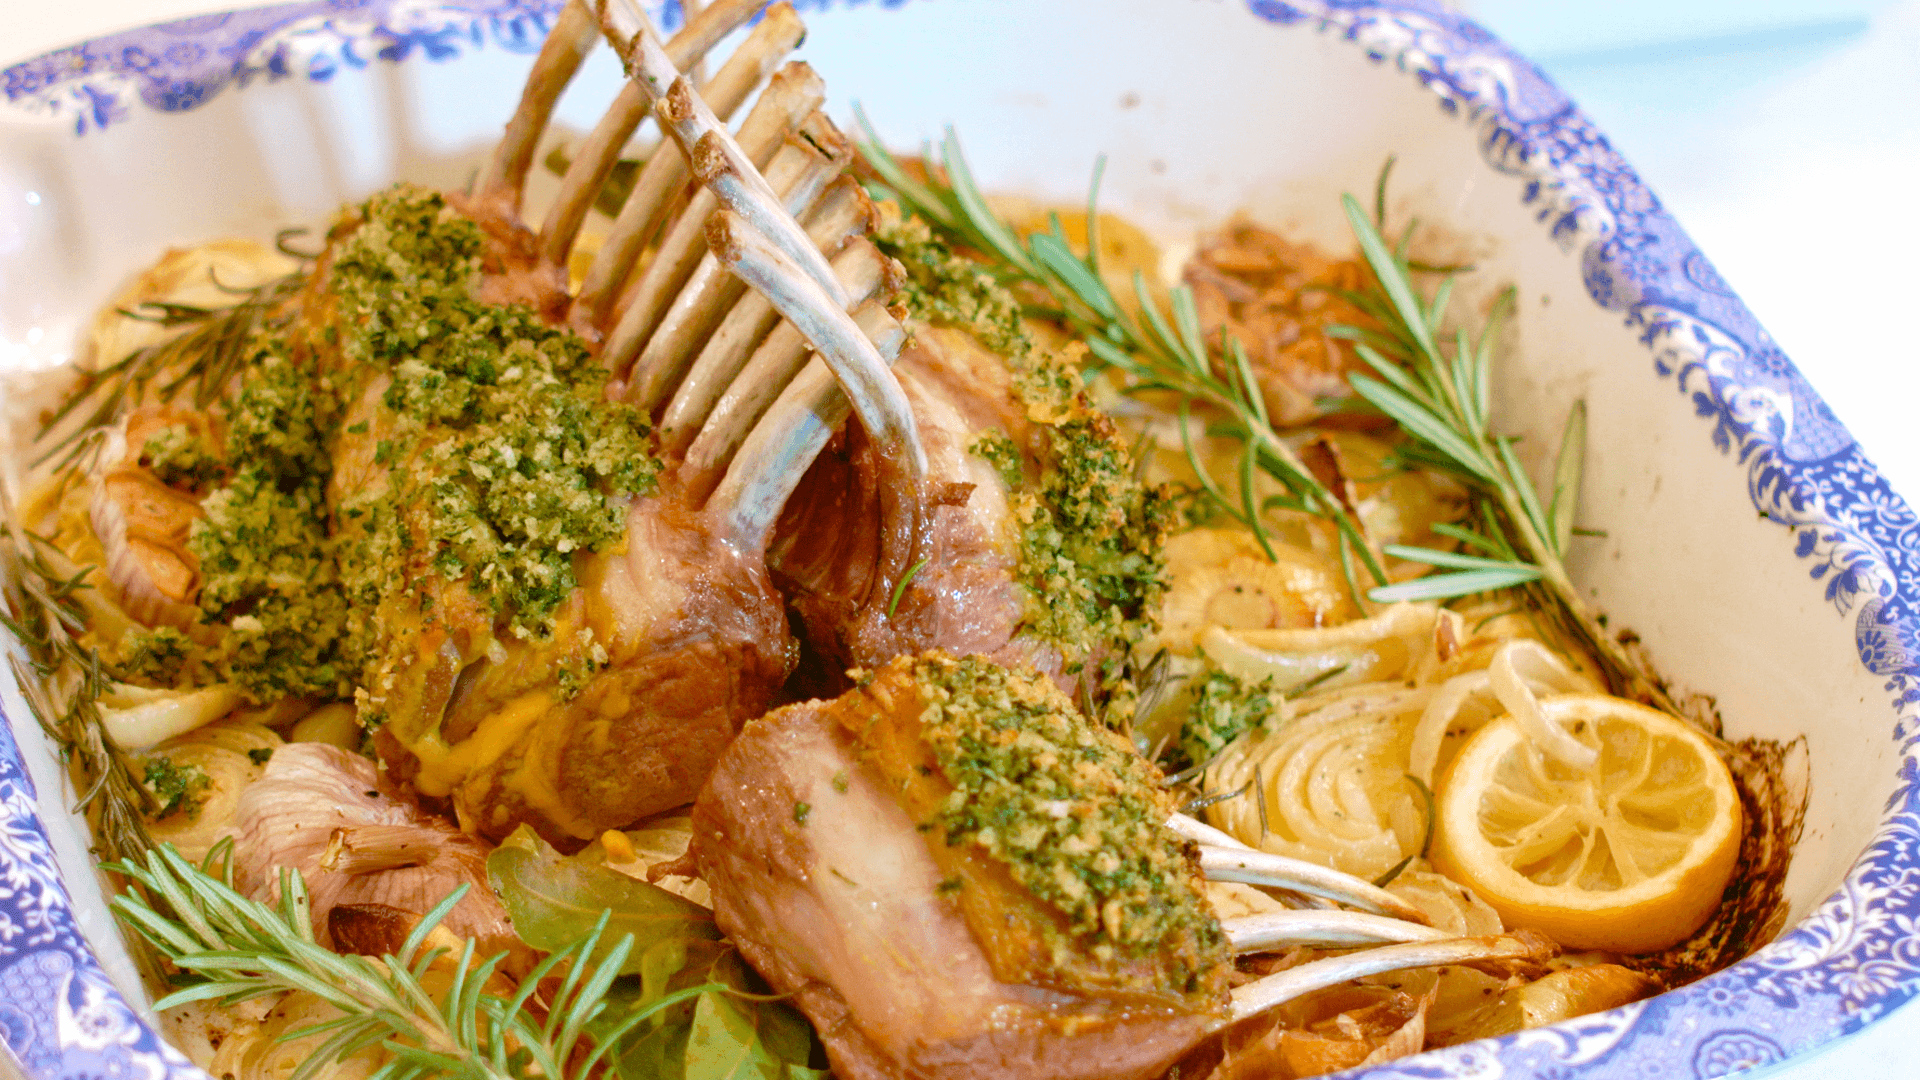 Two interlaced herb crusted lamb racks sit on a pile of roasted onions, herbs and garlic in a blue and white roasting dish.